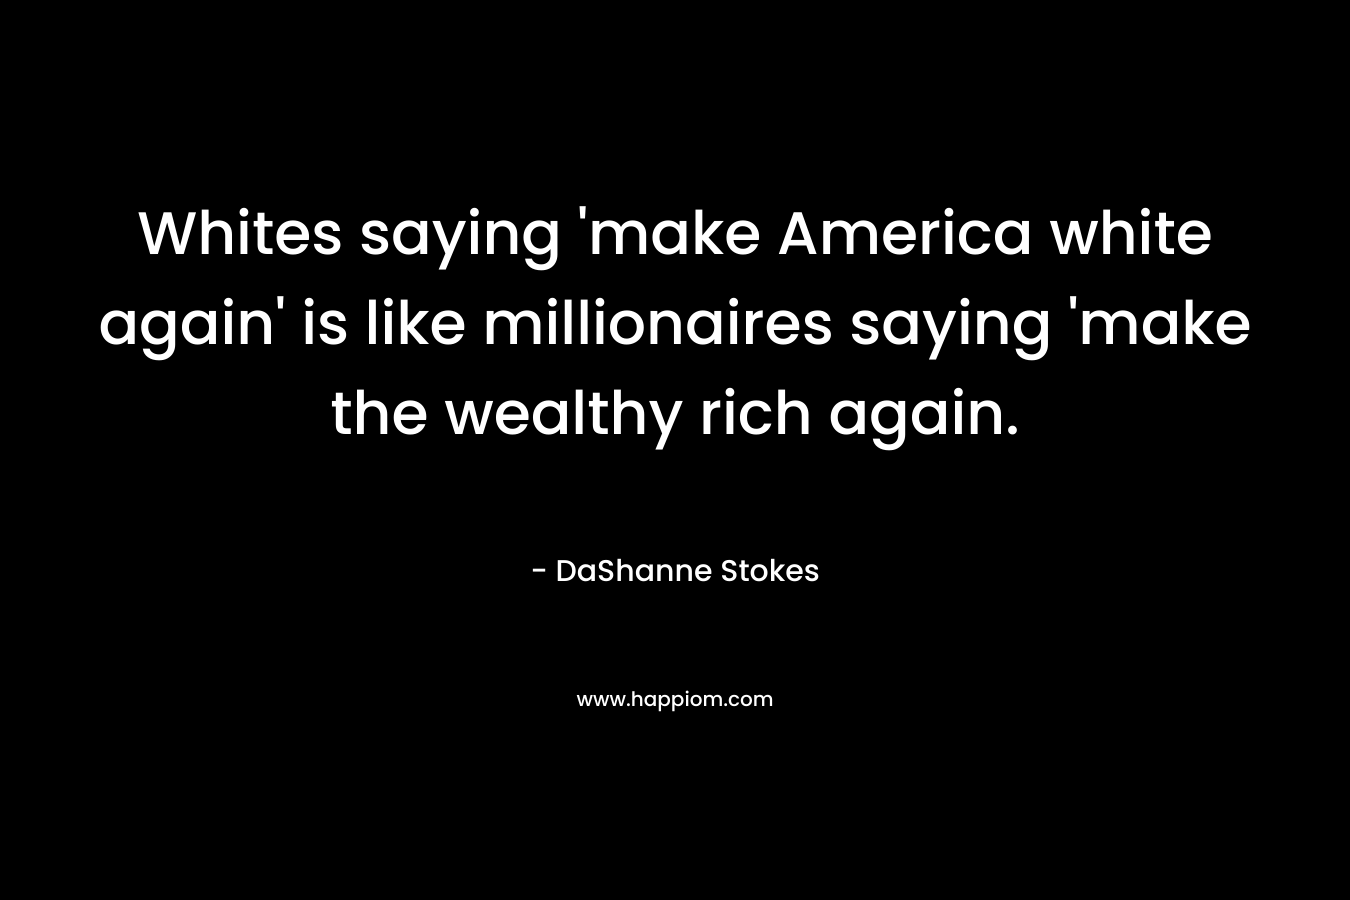 Whites saying ‘make America white again’ is like millionaires saying ‘make the wealthy rich again. – DaShanne Stokes